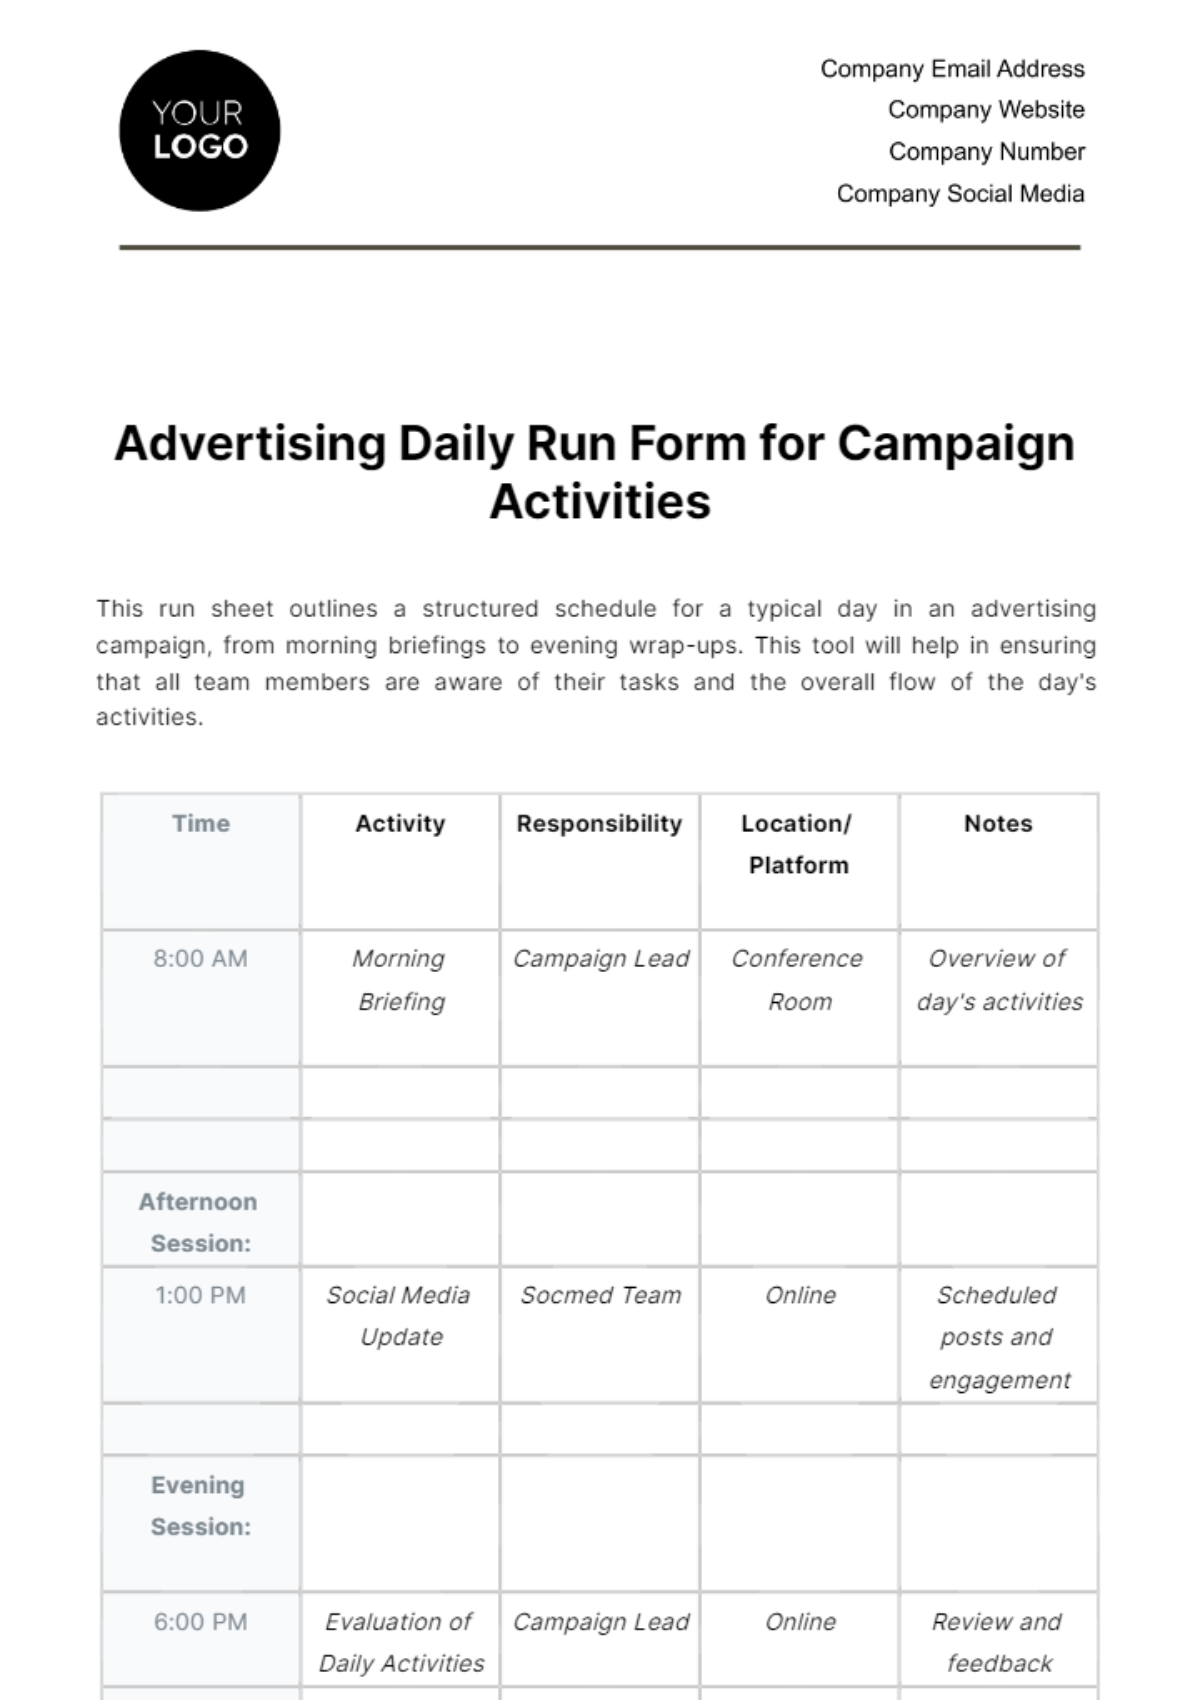 Free Advertising Daily Run Form for Campaign Activities Template